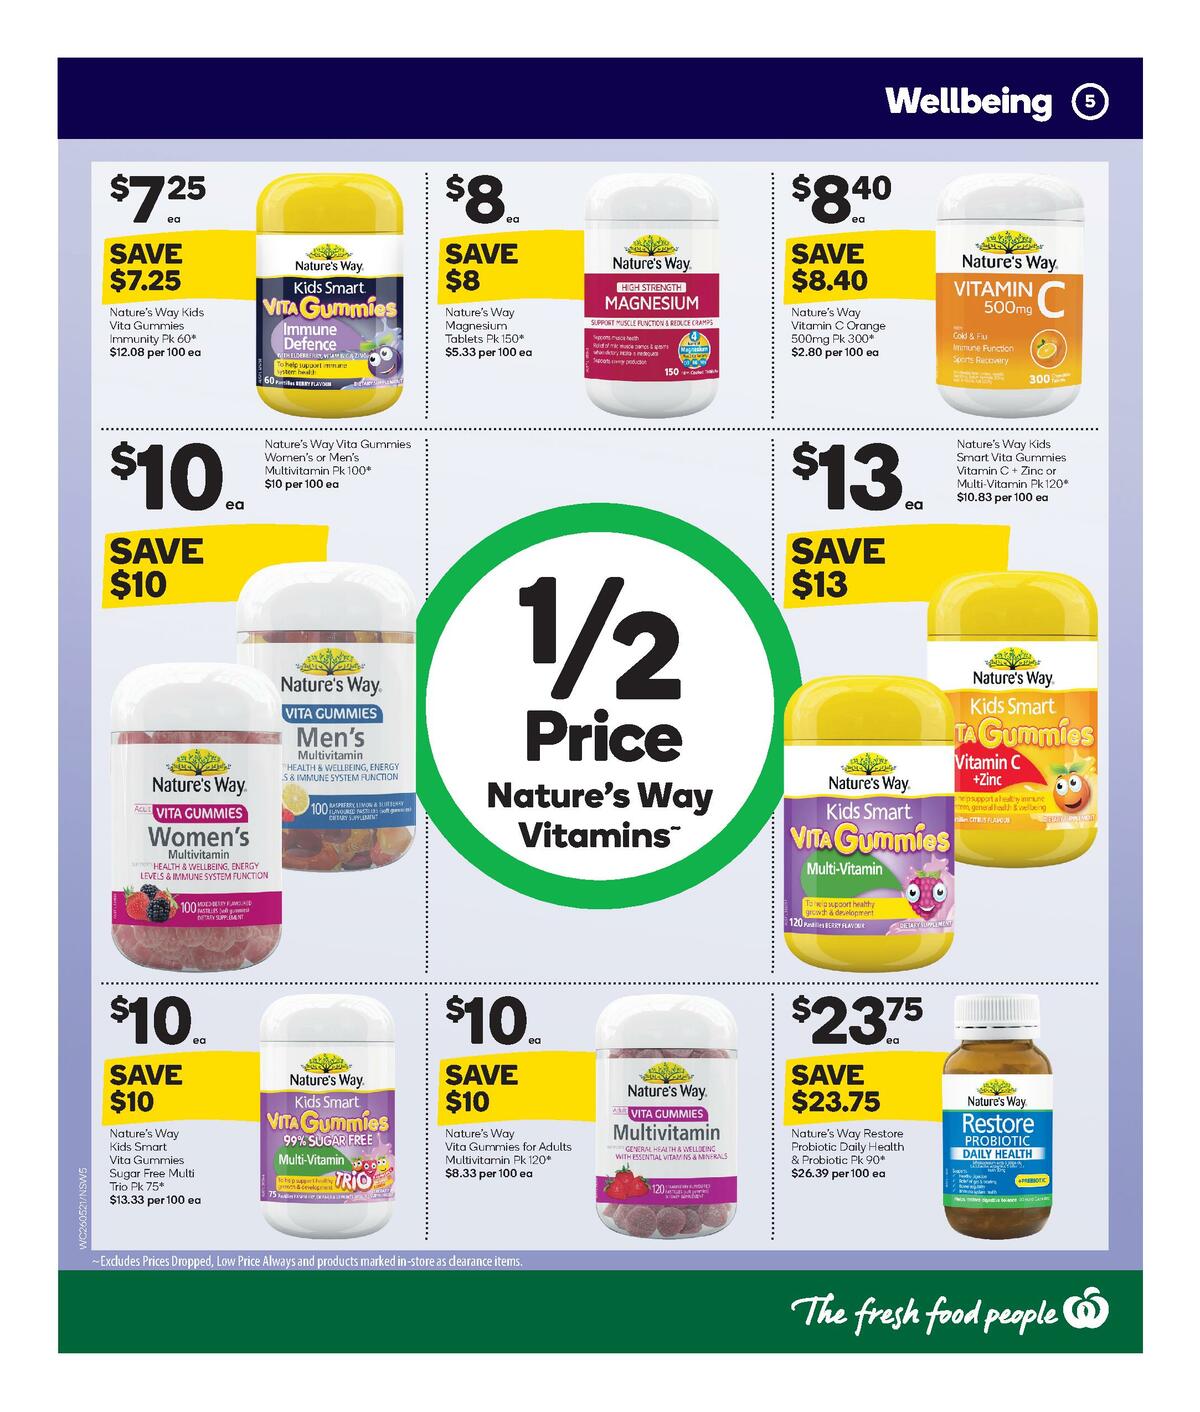 Woolworths Health & Beauty Catalogues from 26 May